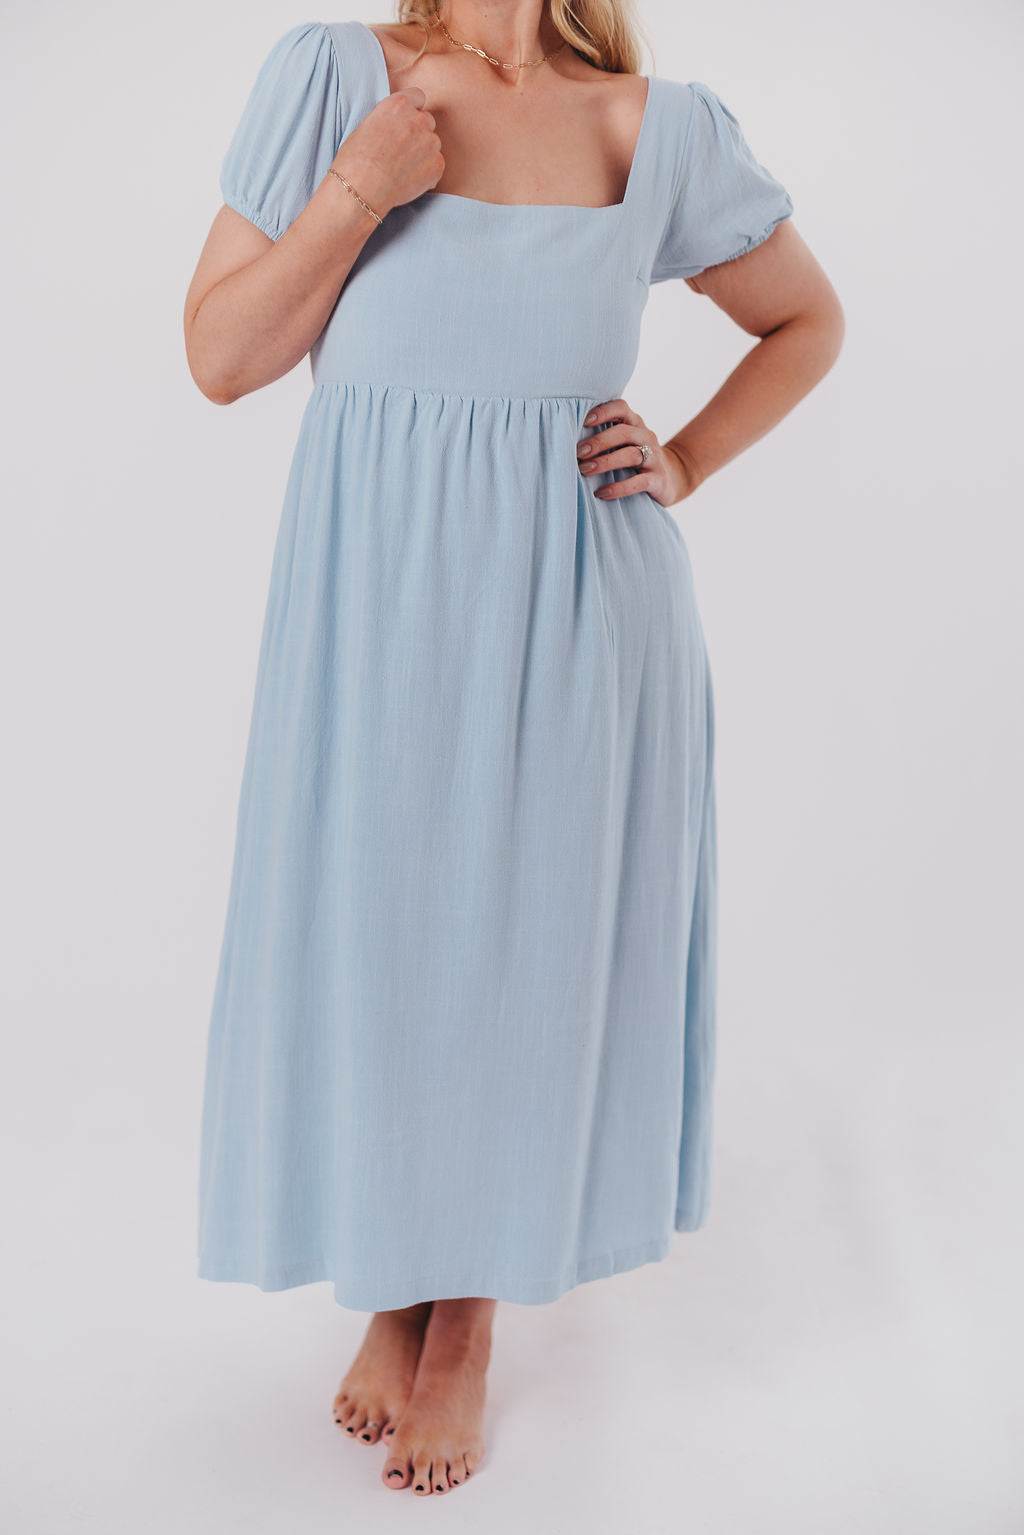 Ainsley Square Neck Midi Dress with Puffed Sleeves in Baby Blue - Bump Friendly & Inclusive Sizing (S-3XL)